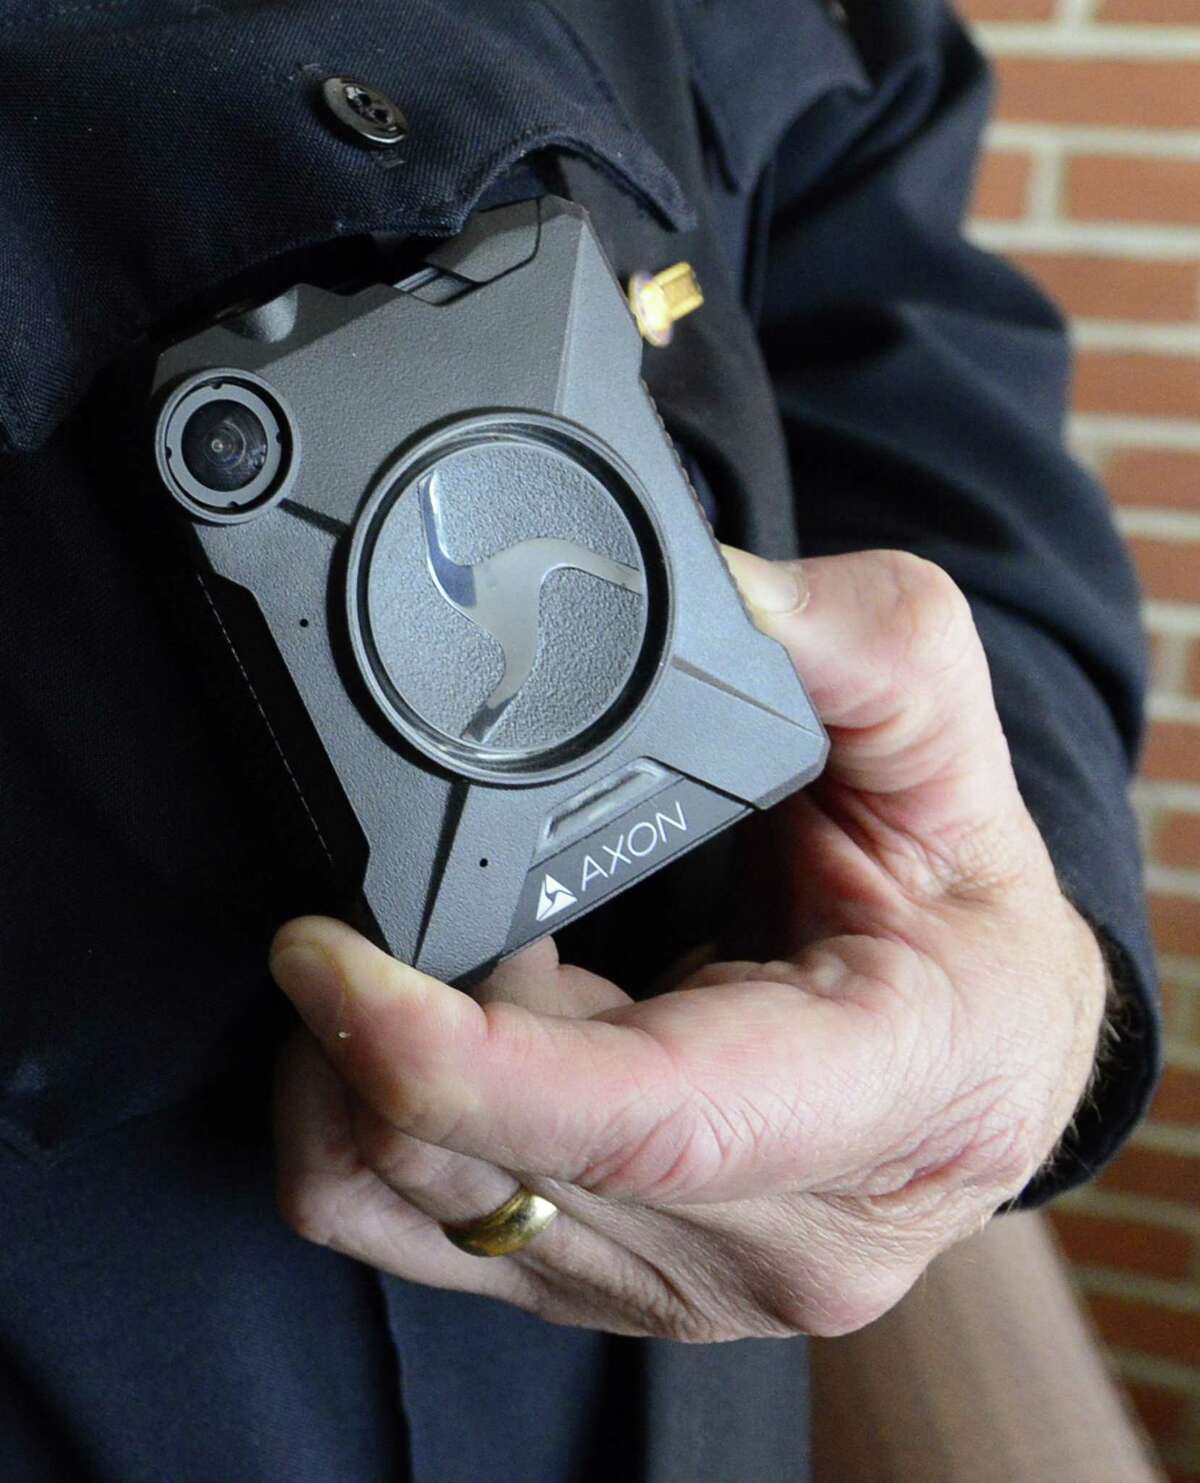 An Axon Flex 2 HD camera, photographed on Wednesday, March 14, 2018 at police headquarters in Stamford, Connecticut, will soon be worn by all patrol officers in the department. Body-worn cameras are recording devices police officers wear as part of their uniforms to document what they see as they perform their duties.